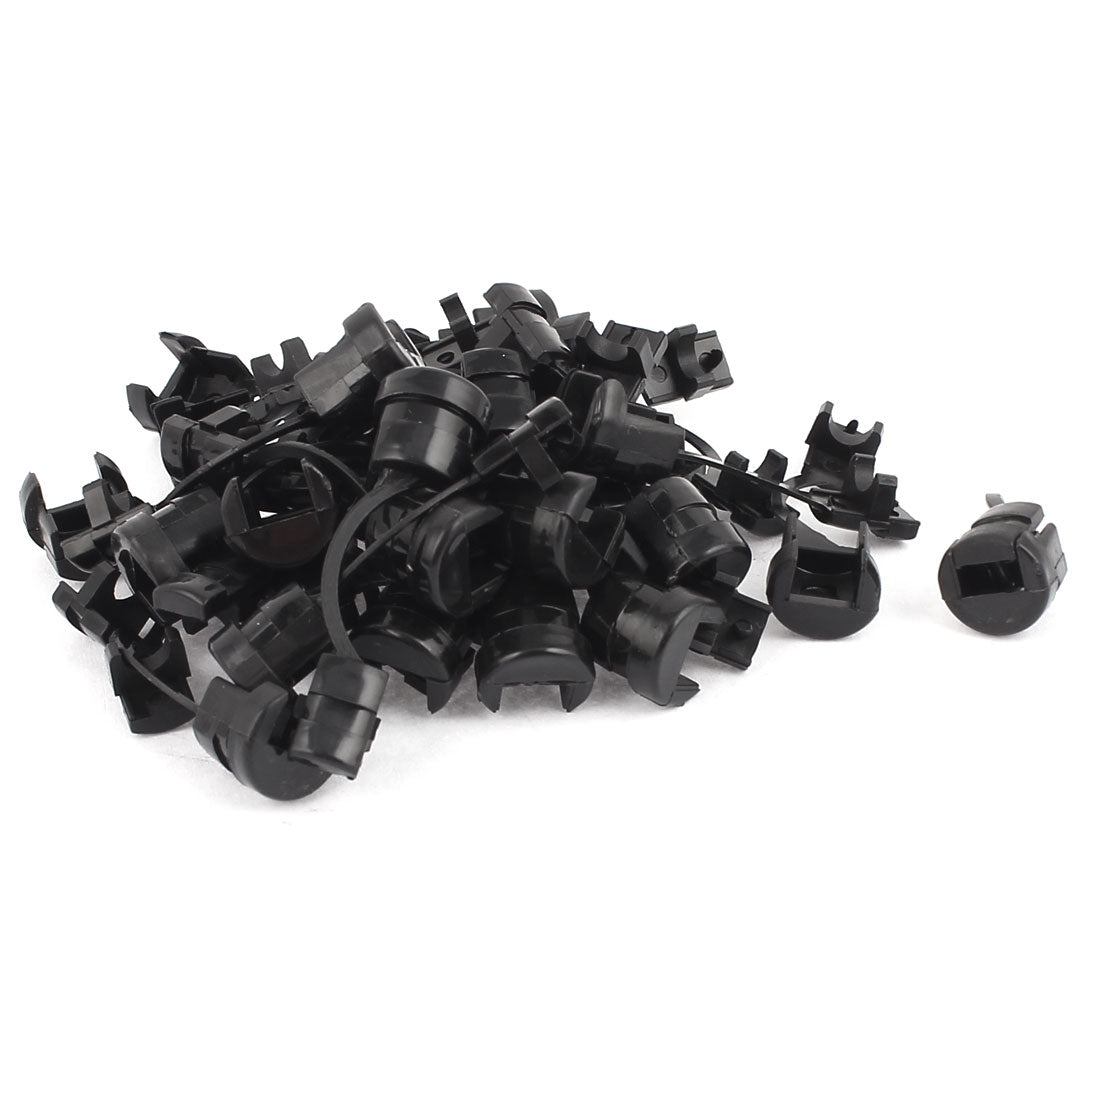 uxcell Uxcell 30 Pcs HDB-A9 Round Cable Wire Strain Relief Bush Grommet 12mm Length